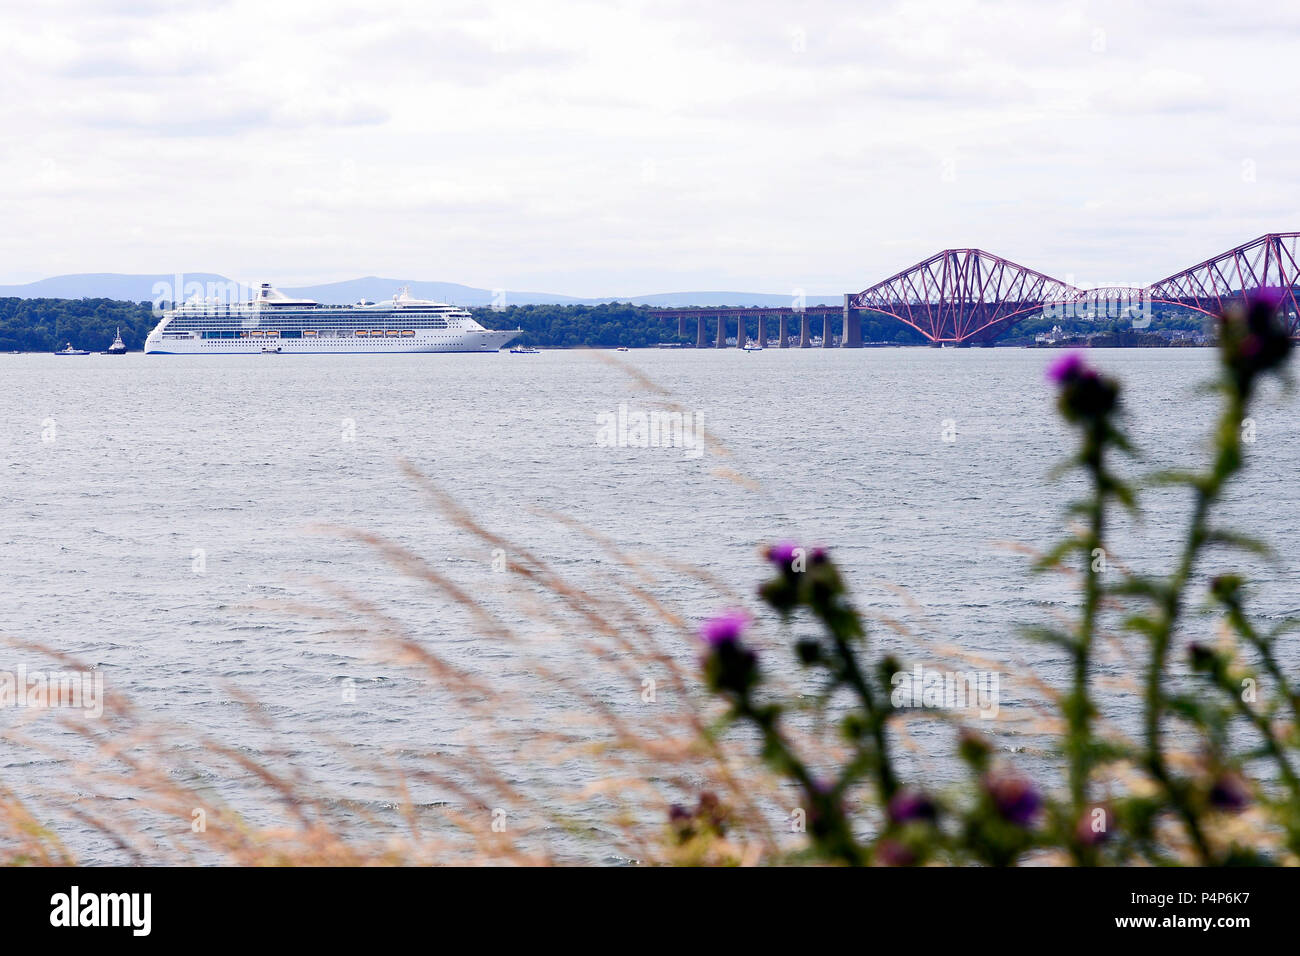 South Queensferry, Scotland, United Kingdom, 23, June, 2018. The cruise ship Brilliance of the Seas at anchor in the Firth of Forth beside the Forth bridges, © Ken Jack / Alamy Live News Stock Photo